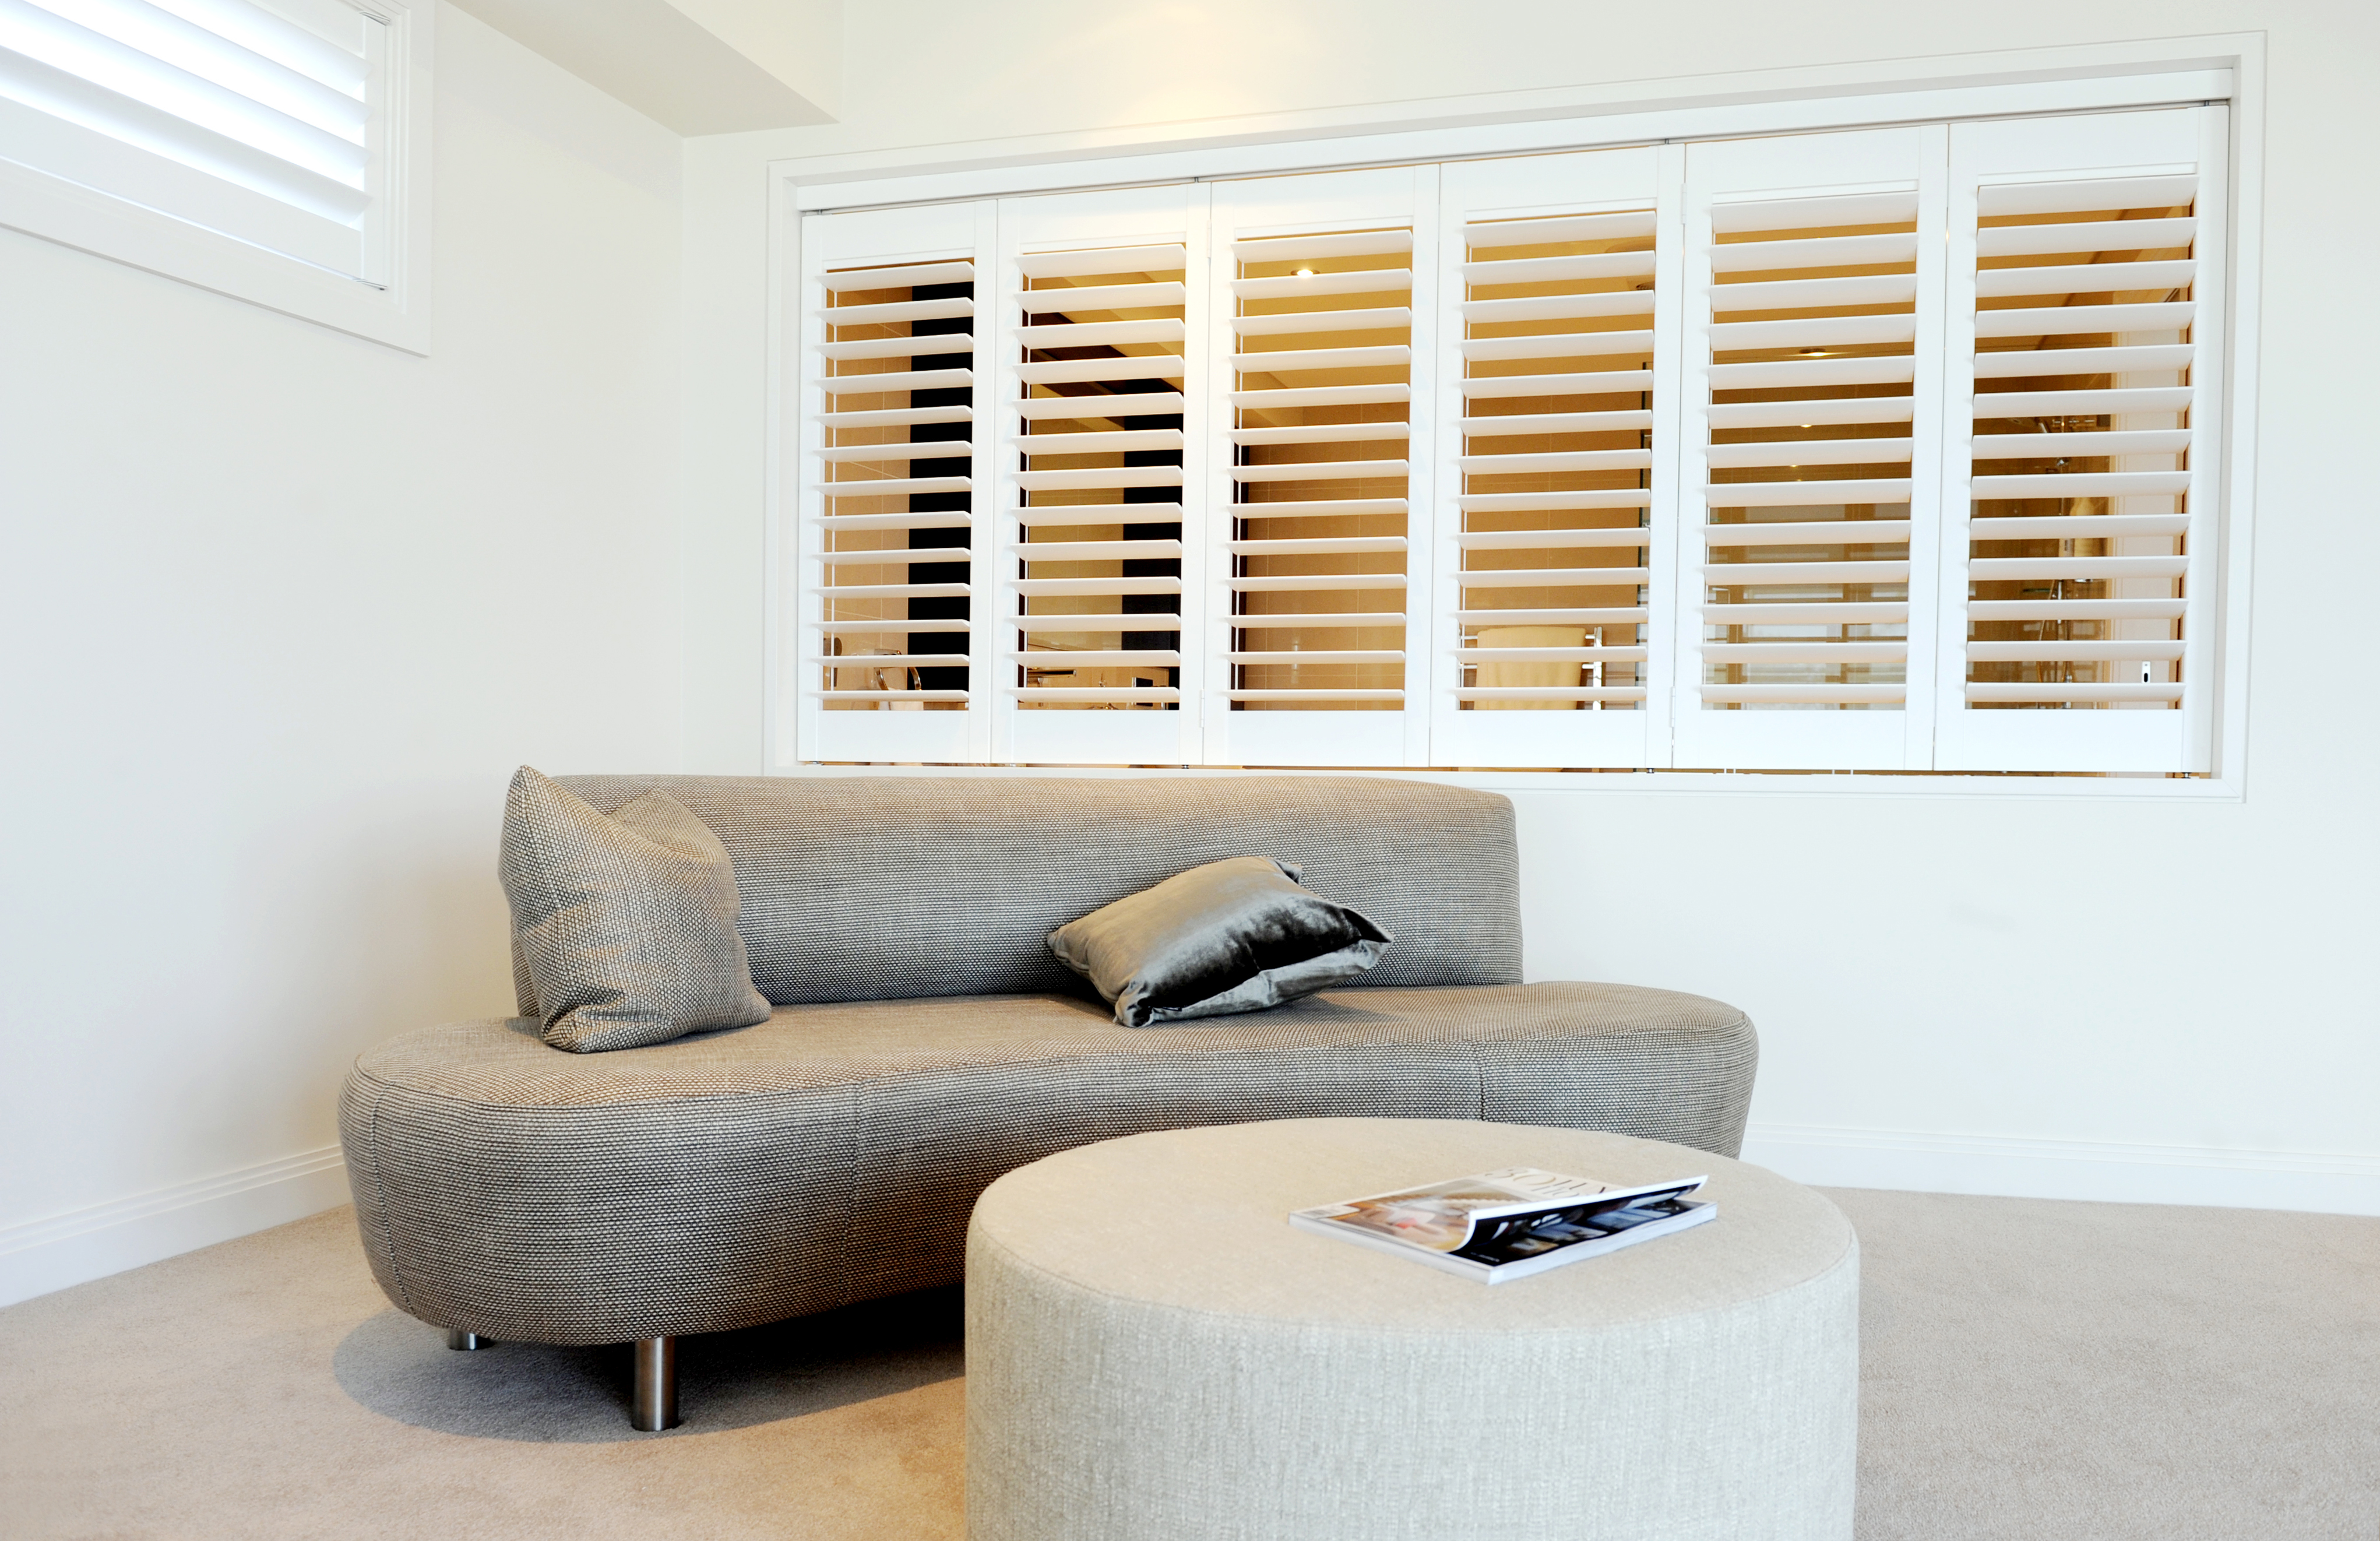 D&R SUNSHADES | THE OUTDOOR BLINDS SPECIALISTS QLD